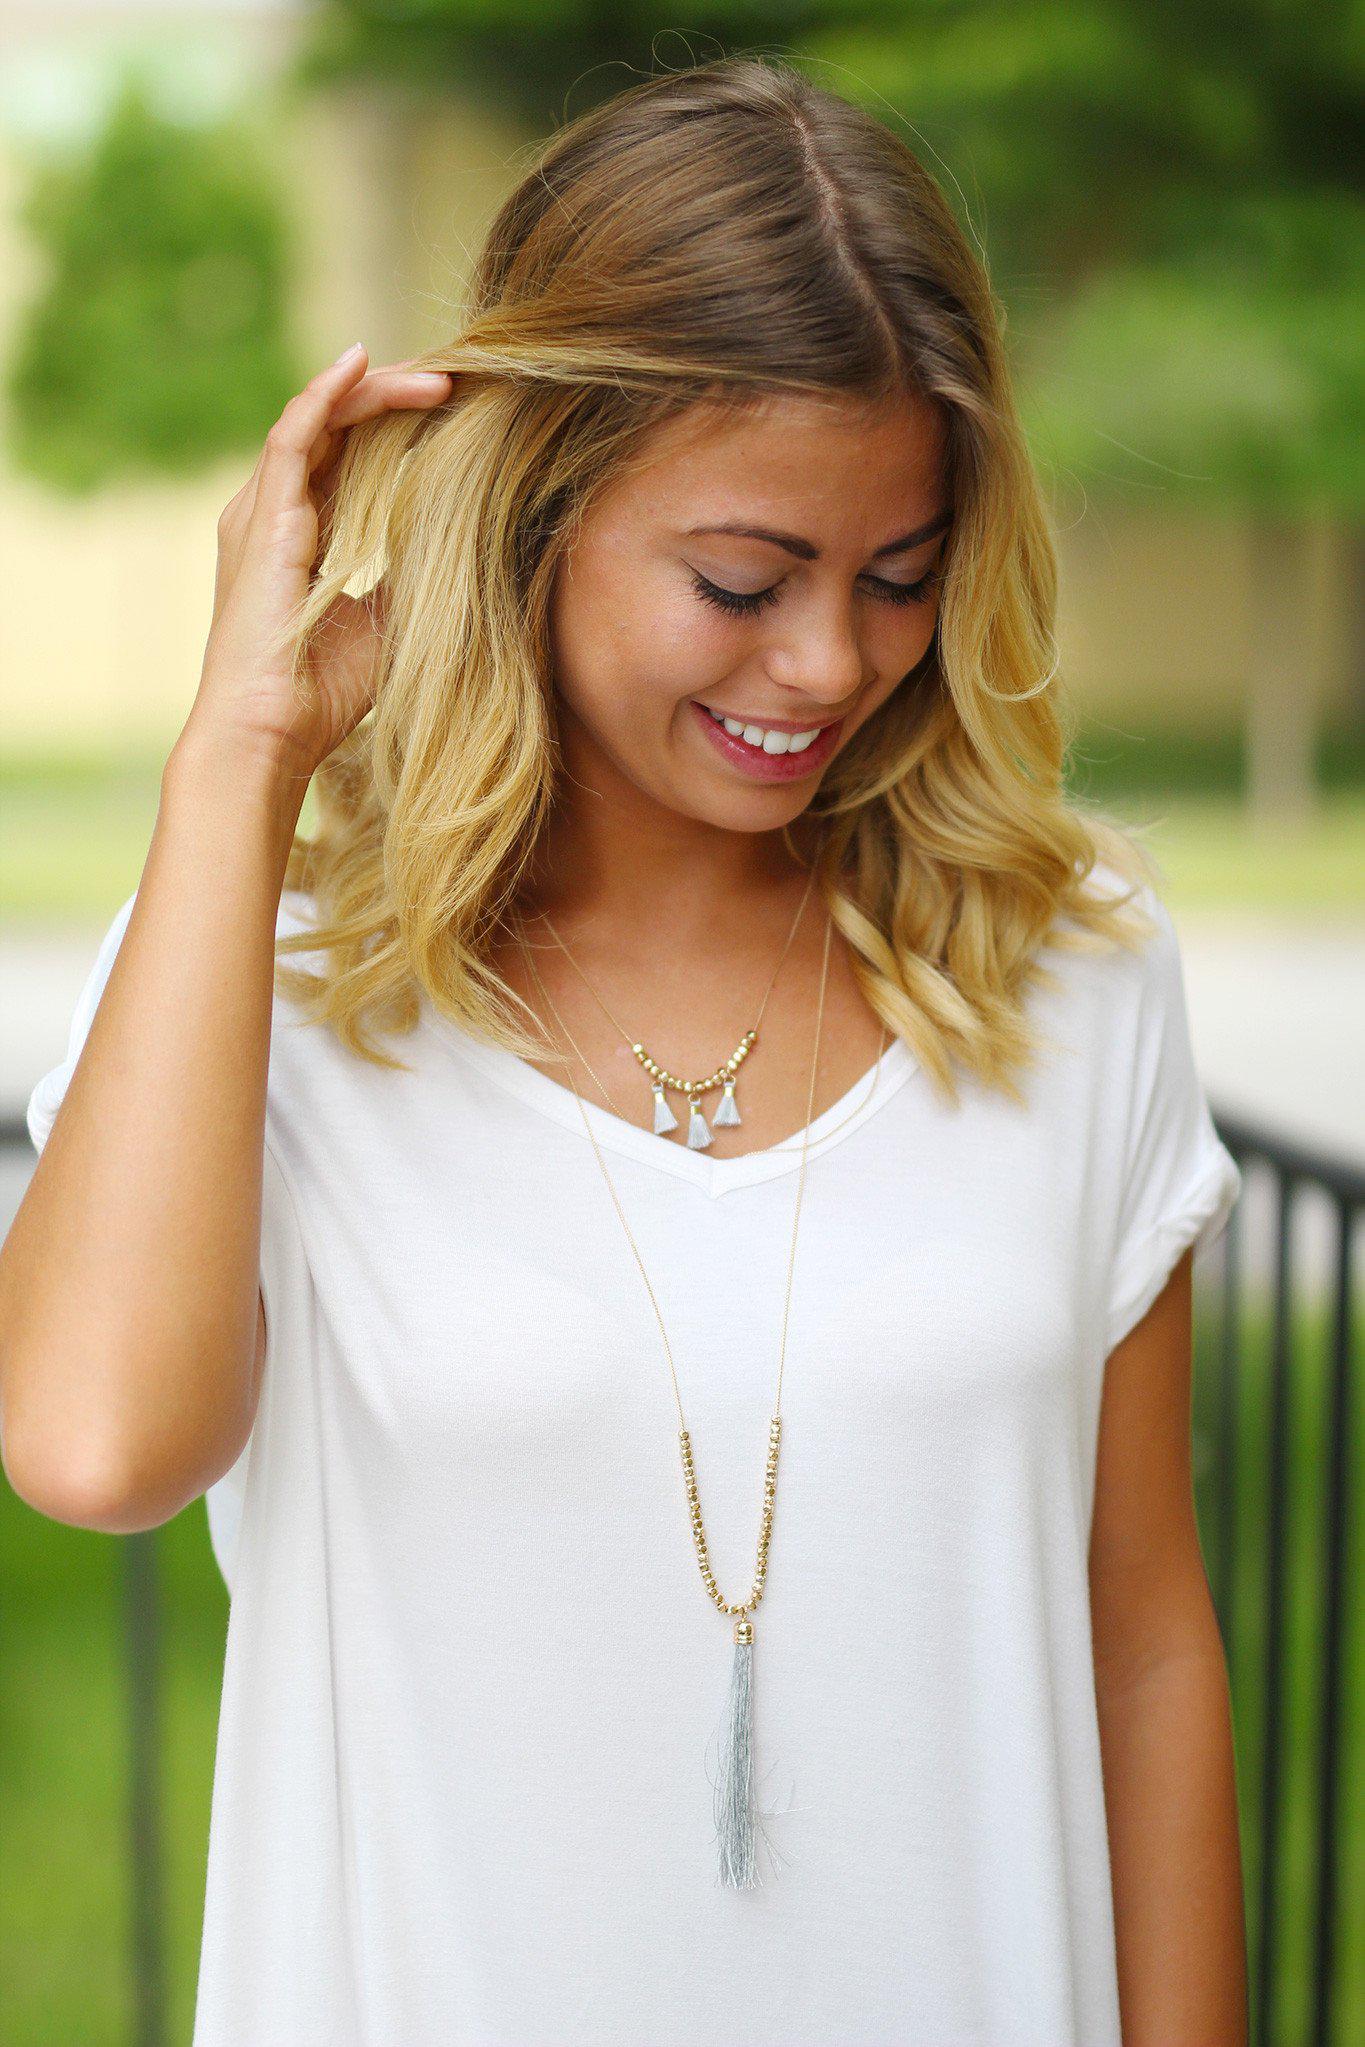 Gold Layered Gray Tassel Necklace